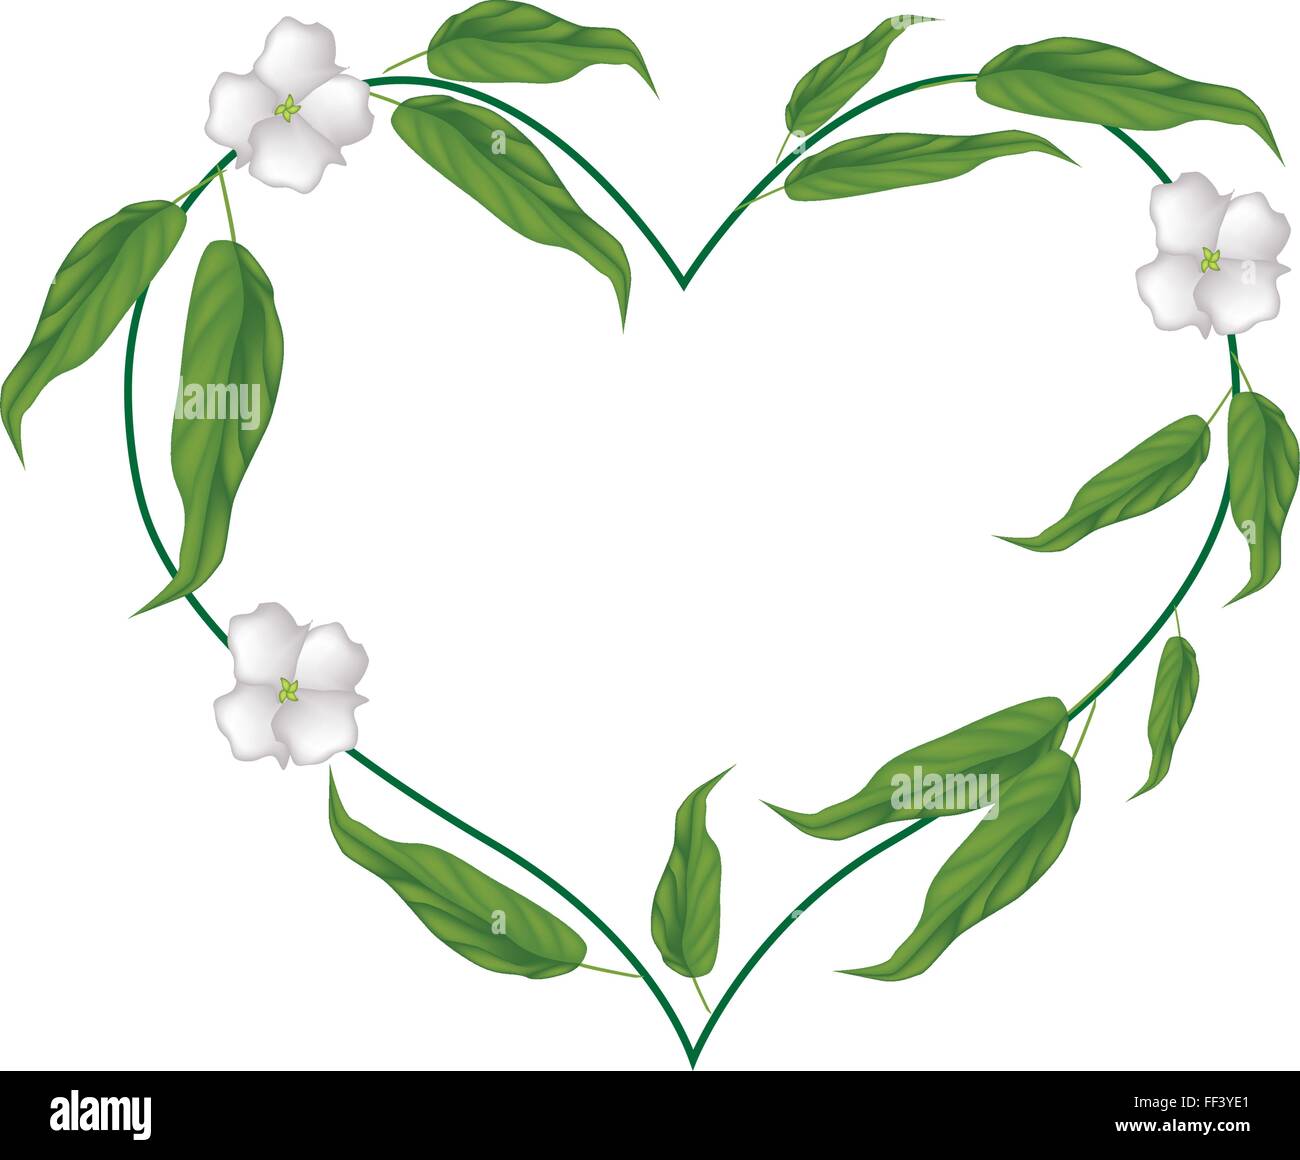 Love Concept, Illustration of Heart Shape with Chebulic Myrobalan with Leaves and Blossoms Isolated on White Background. Stock Vector